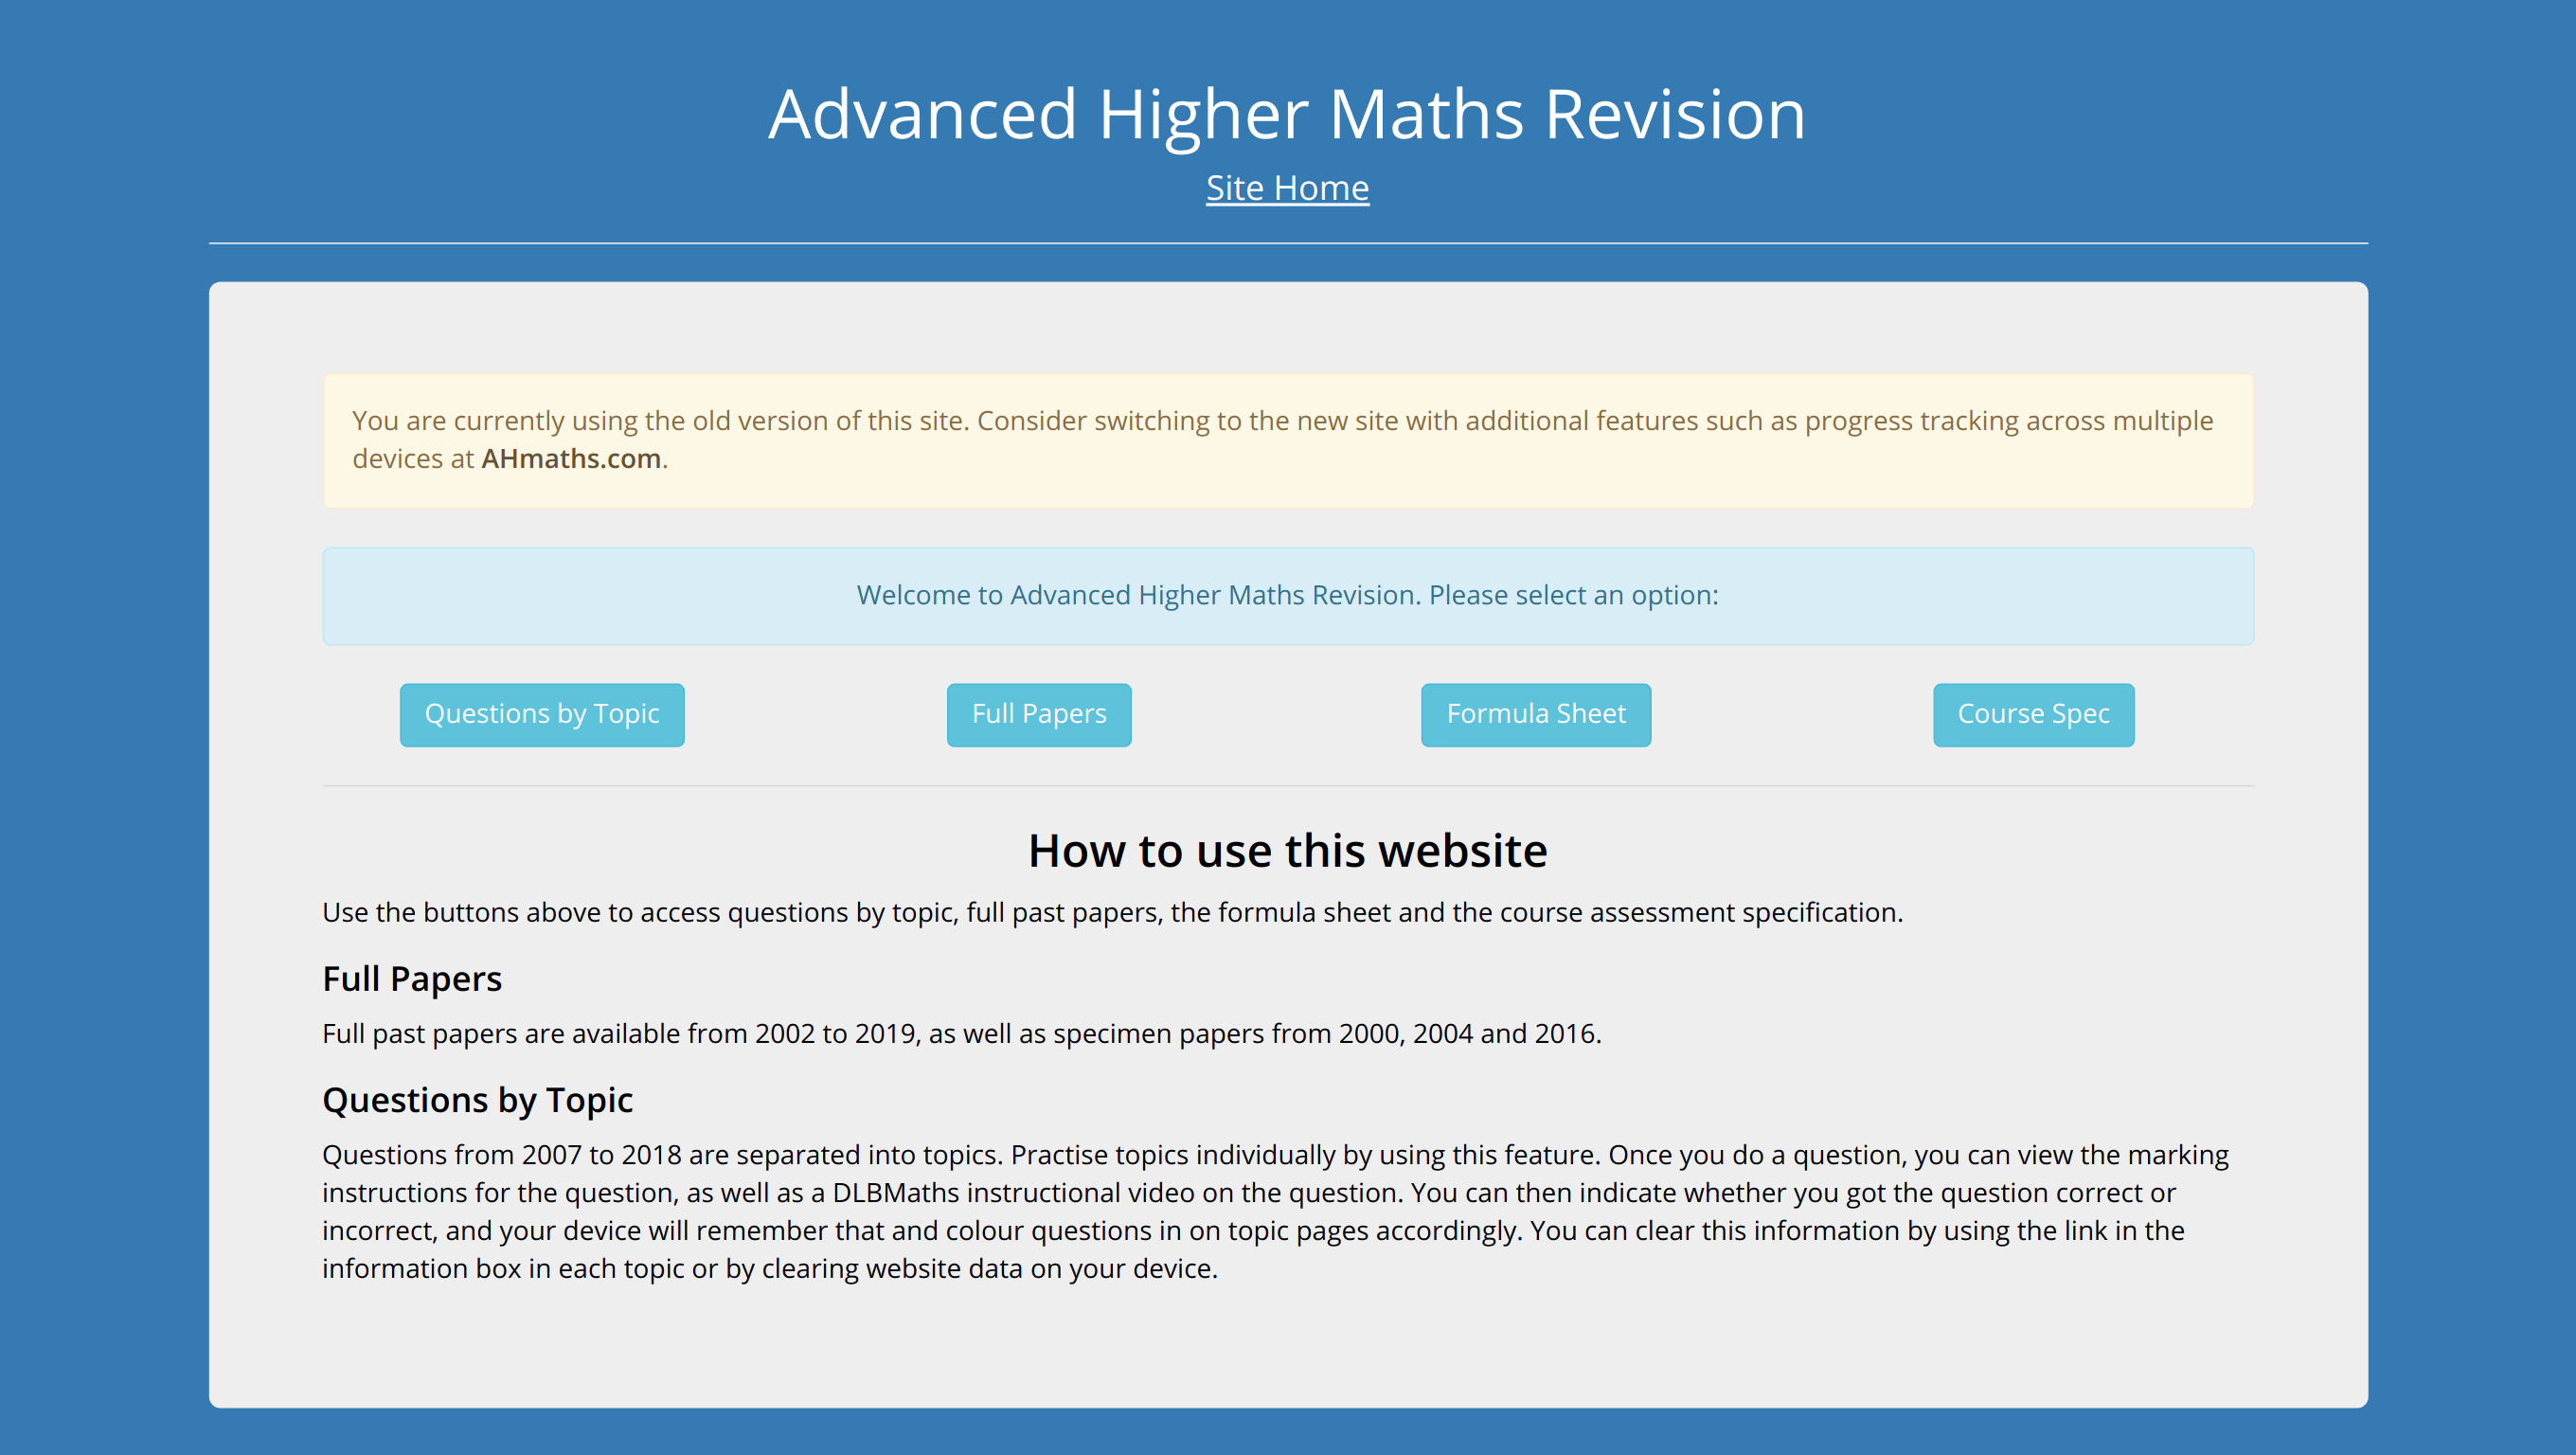 Image of Advanced Higher Maths Revision